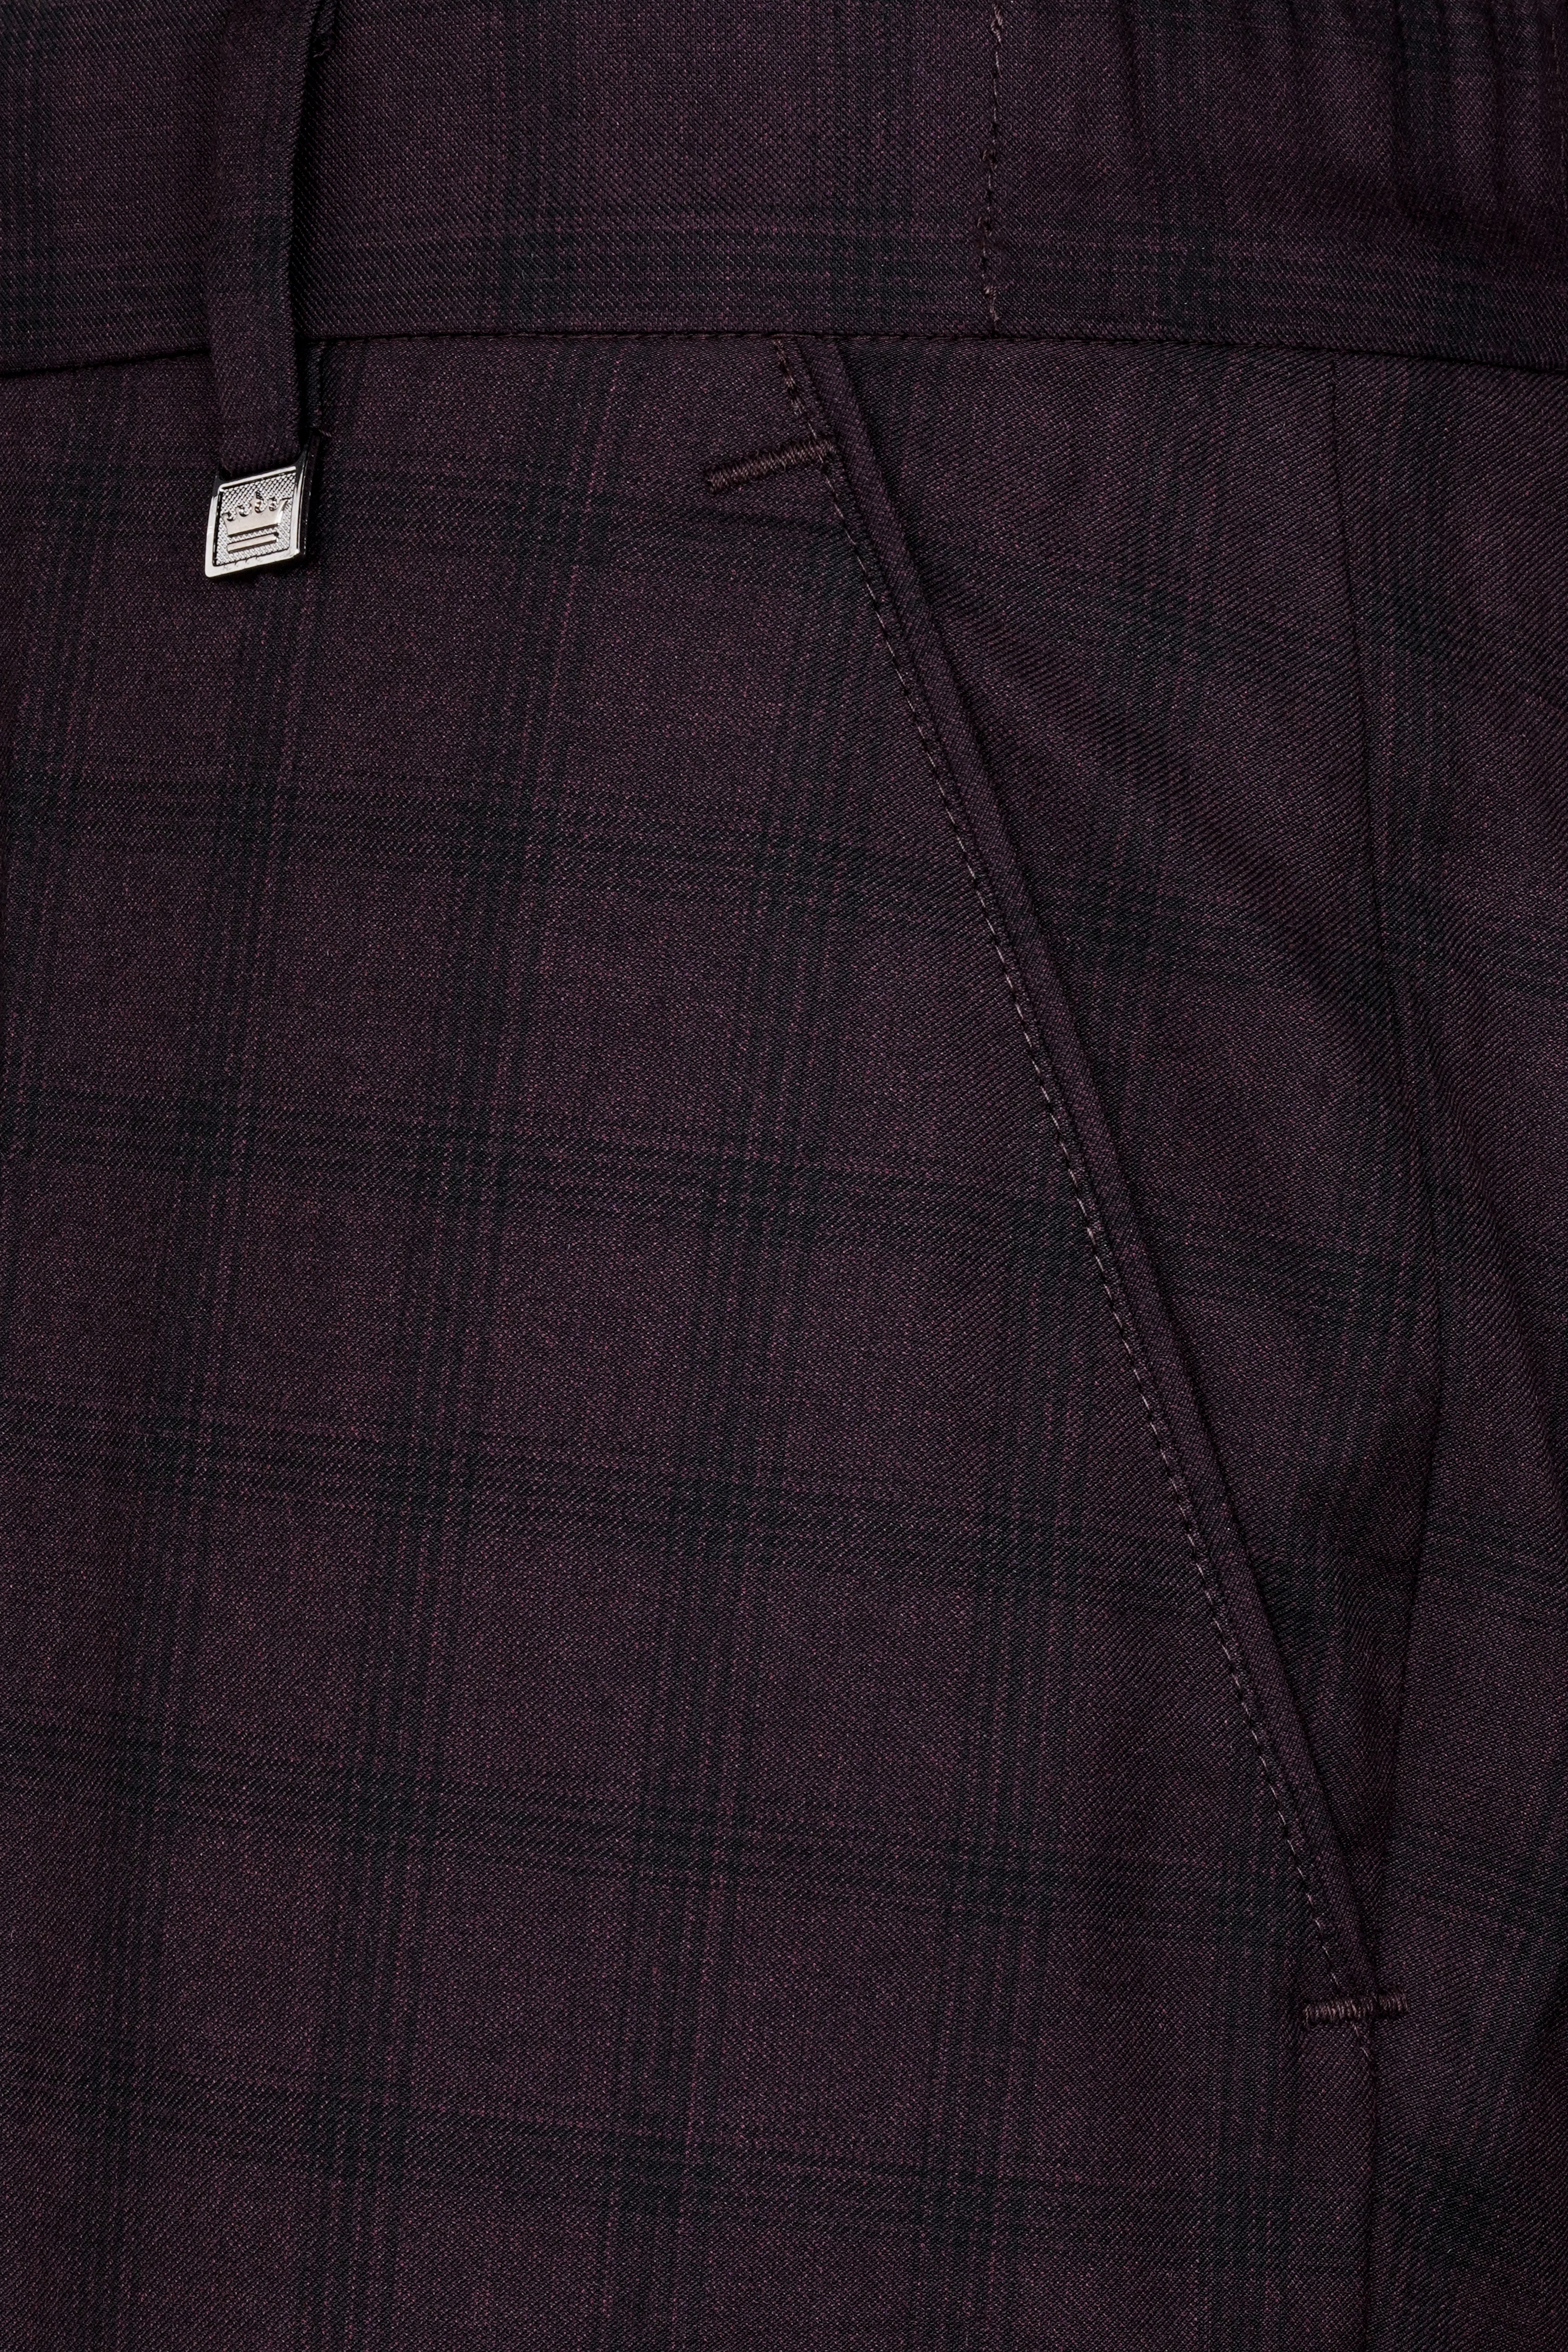 Cinder Purple Checkered Wool Rich Pant T2916-SW-28, T2916-SW-30, T2916-SW-32, T2916-SW-34, T2916-SW-36, T2916-SW-38, T2916-SW-40, T2916-SW-42, T2916-SW-44